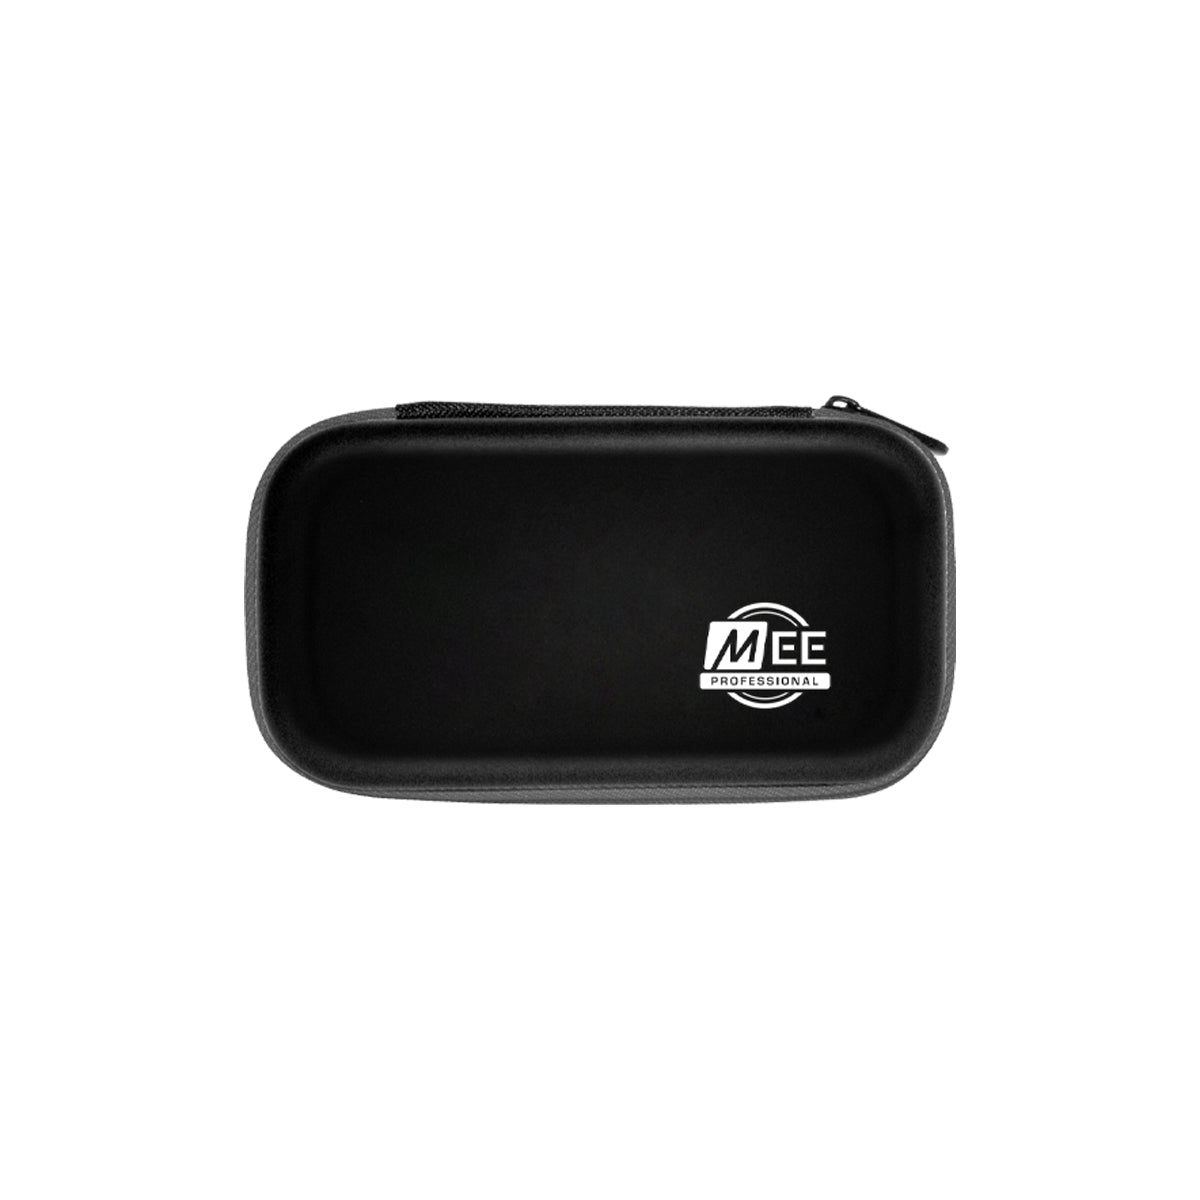 Image of Zippered Protective Carrying Case for In Ear Monitors.